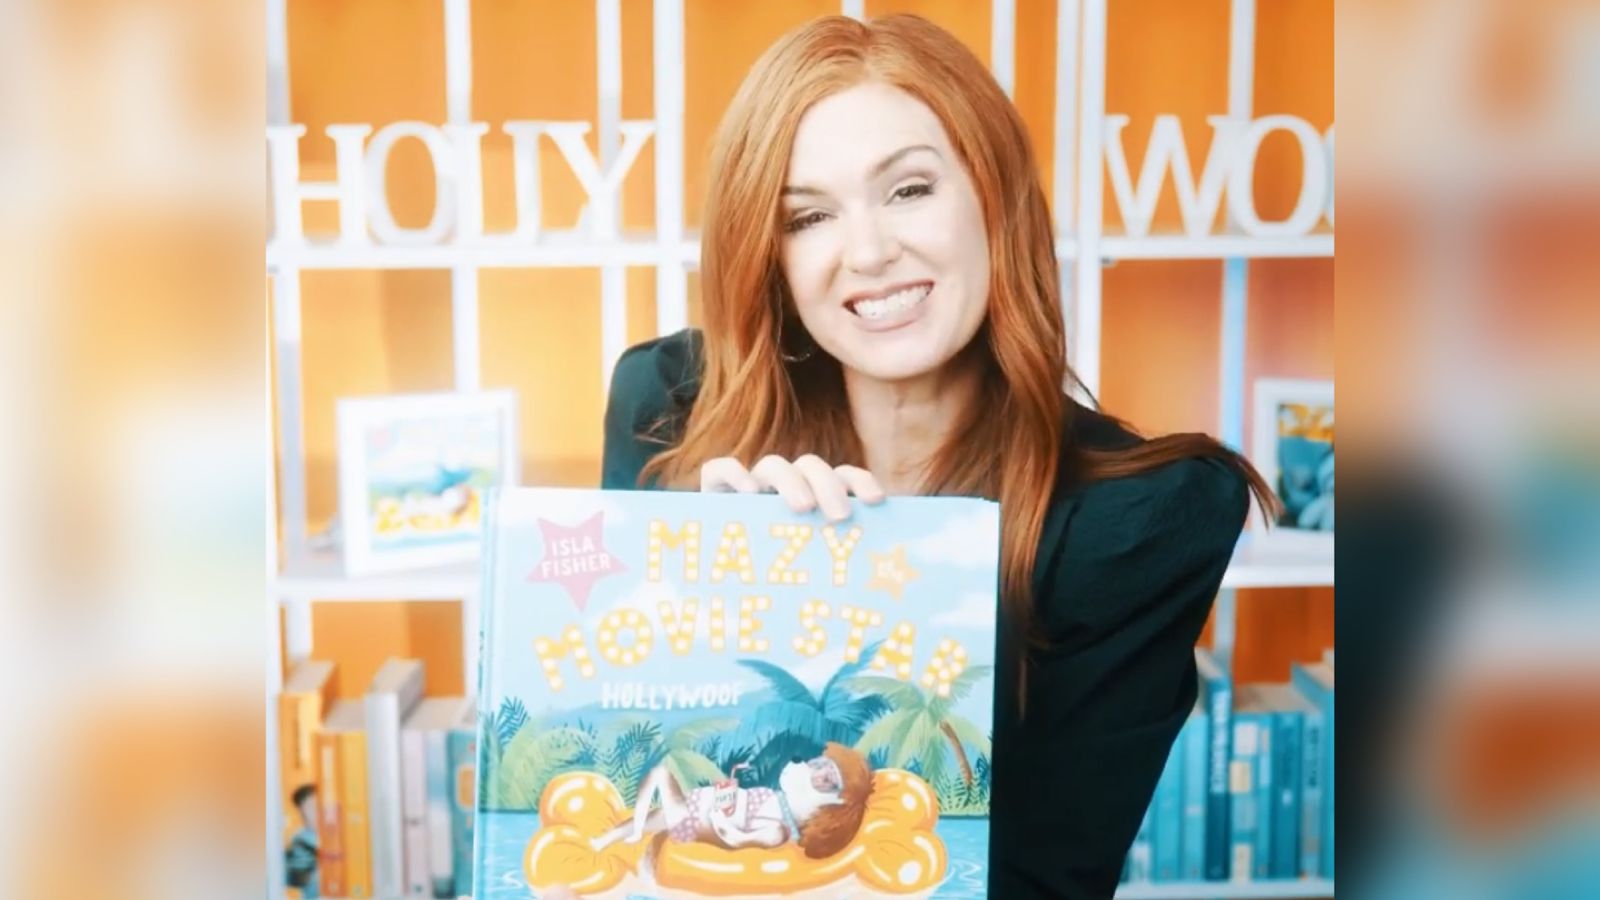 Isla Fisher Excitedly Unveils 1st Picture Book on IG Despite Previously Calling the Platform 'Toxic'